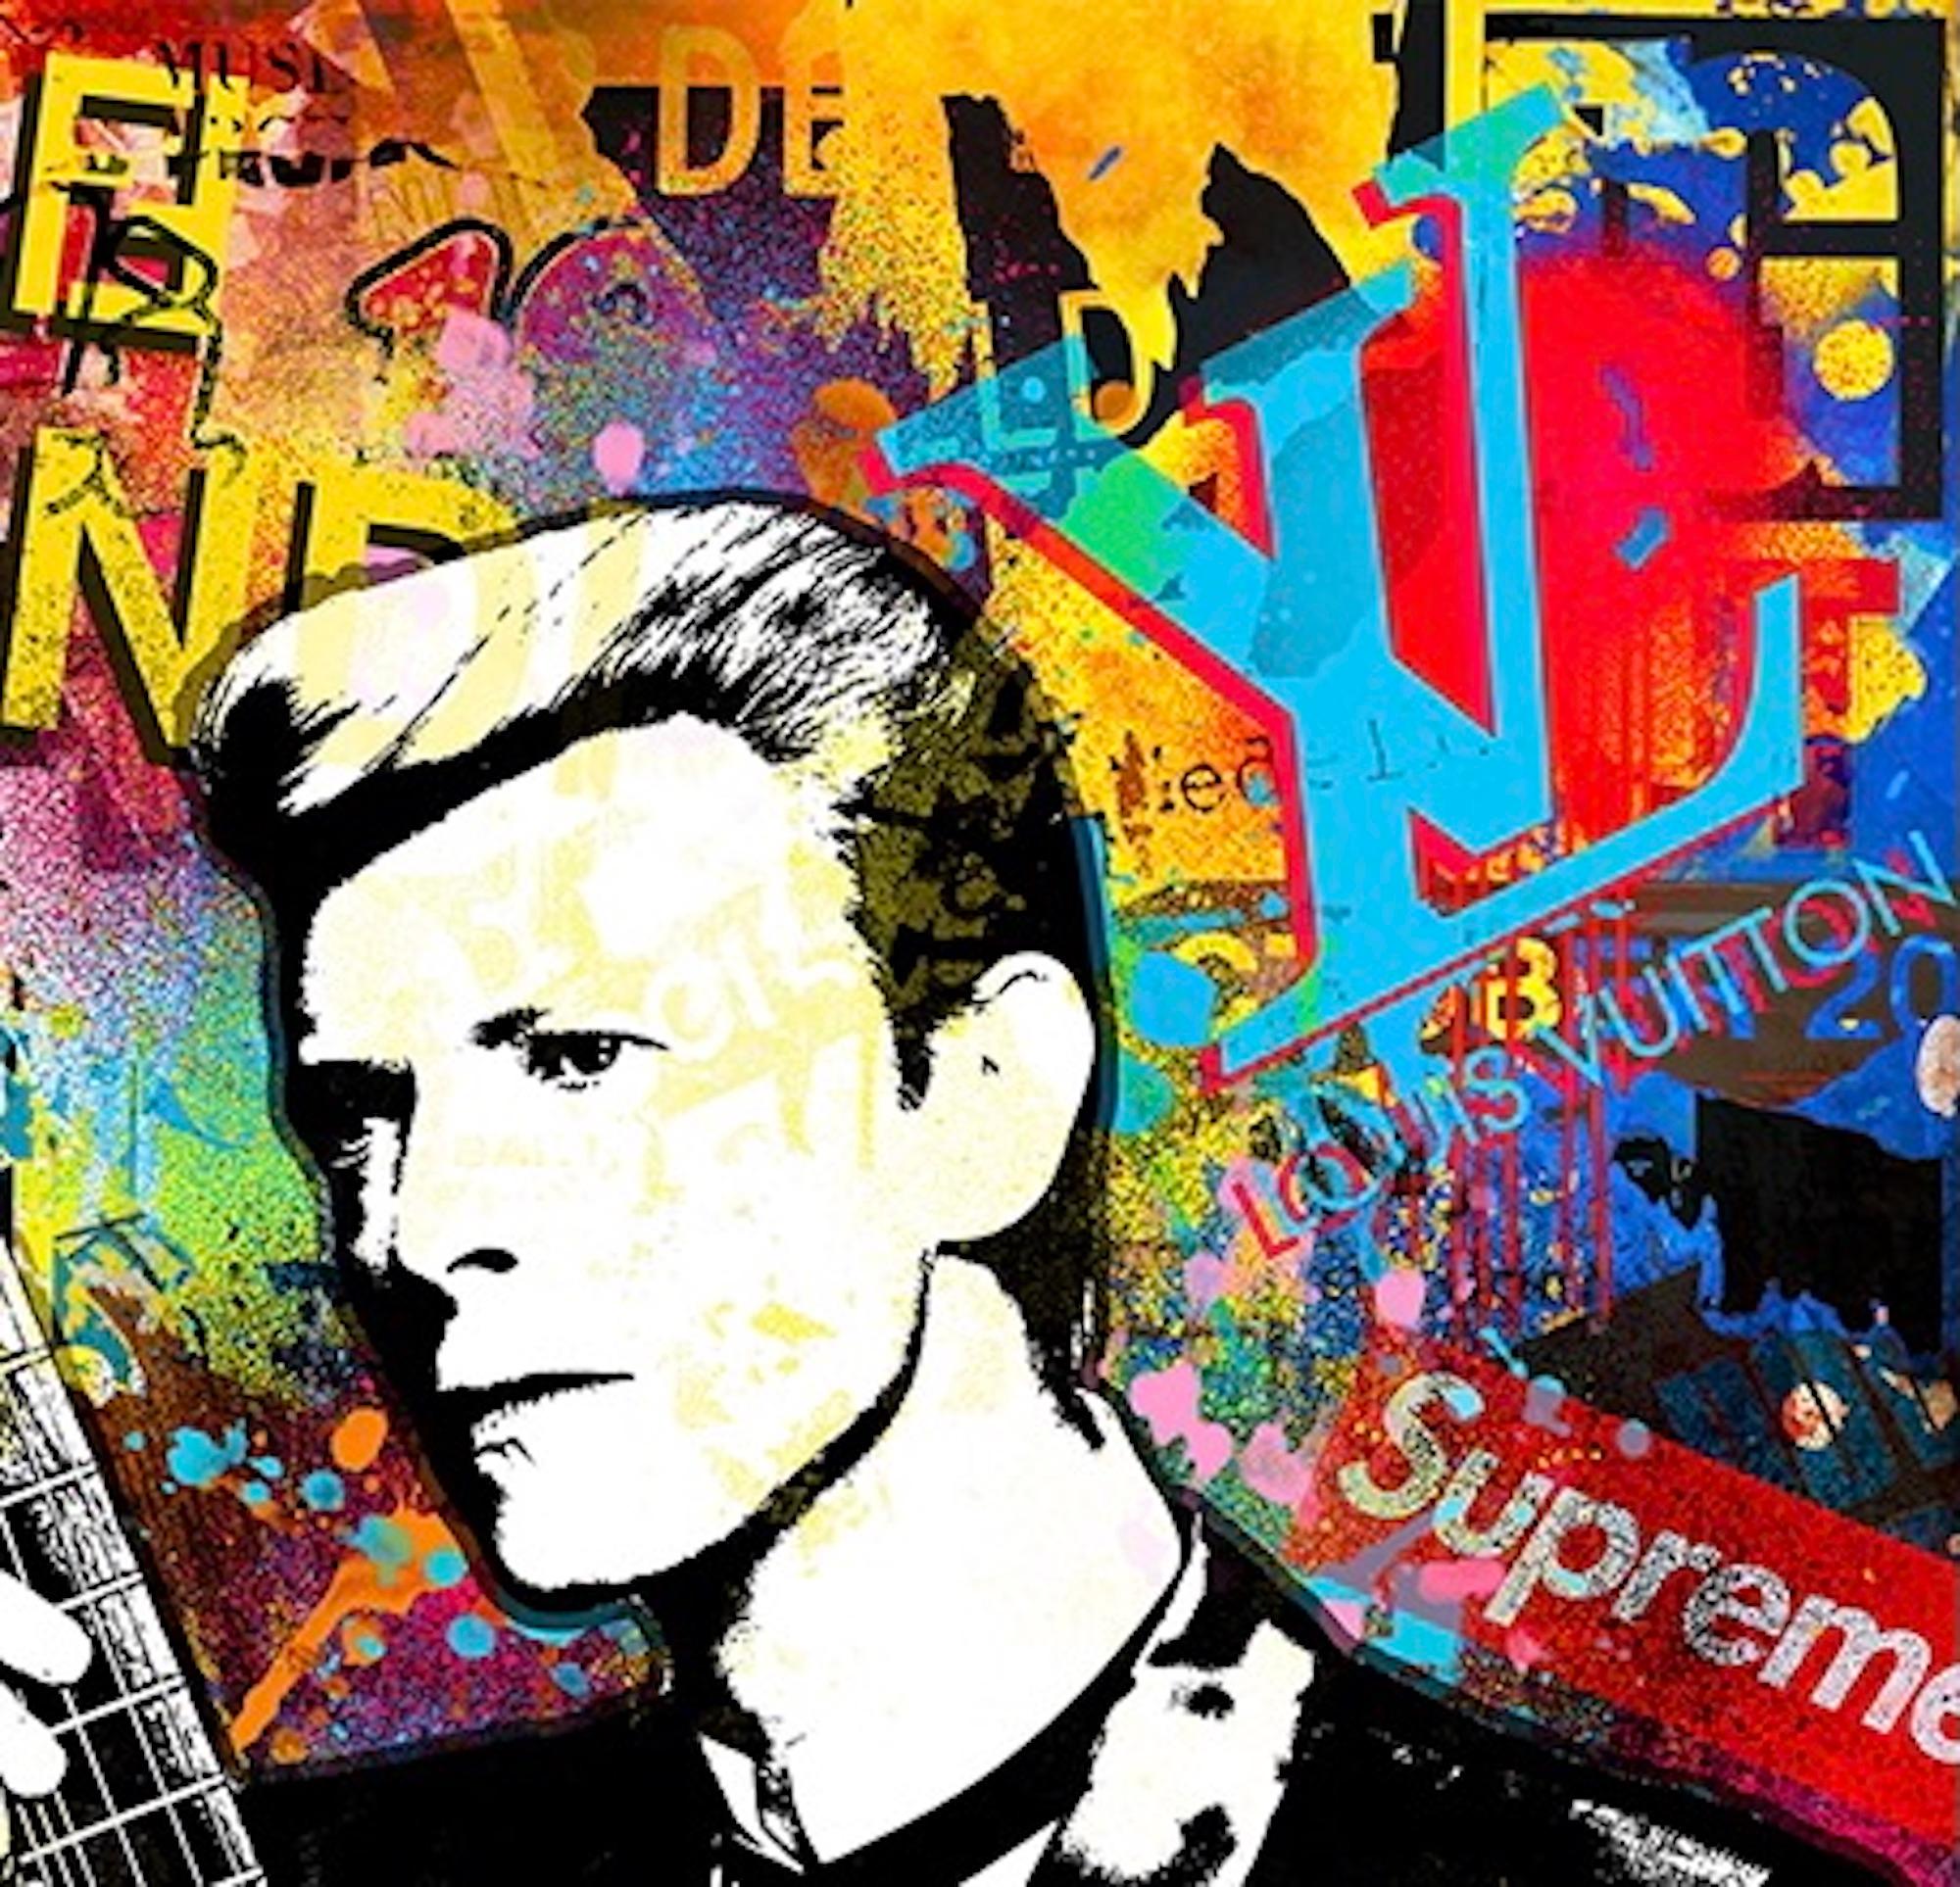 (Bowie) Wishful Mysteries, Colourful Pop Art Painting, Contemporary Portraiture For Sale 1